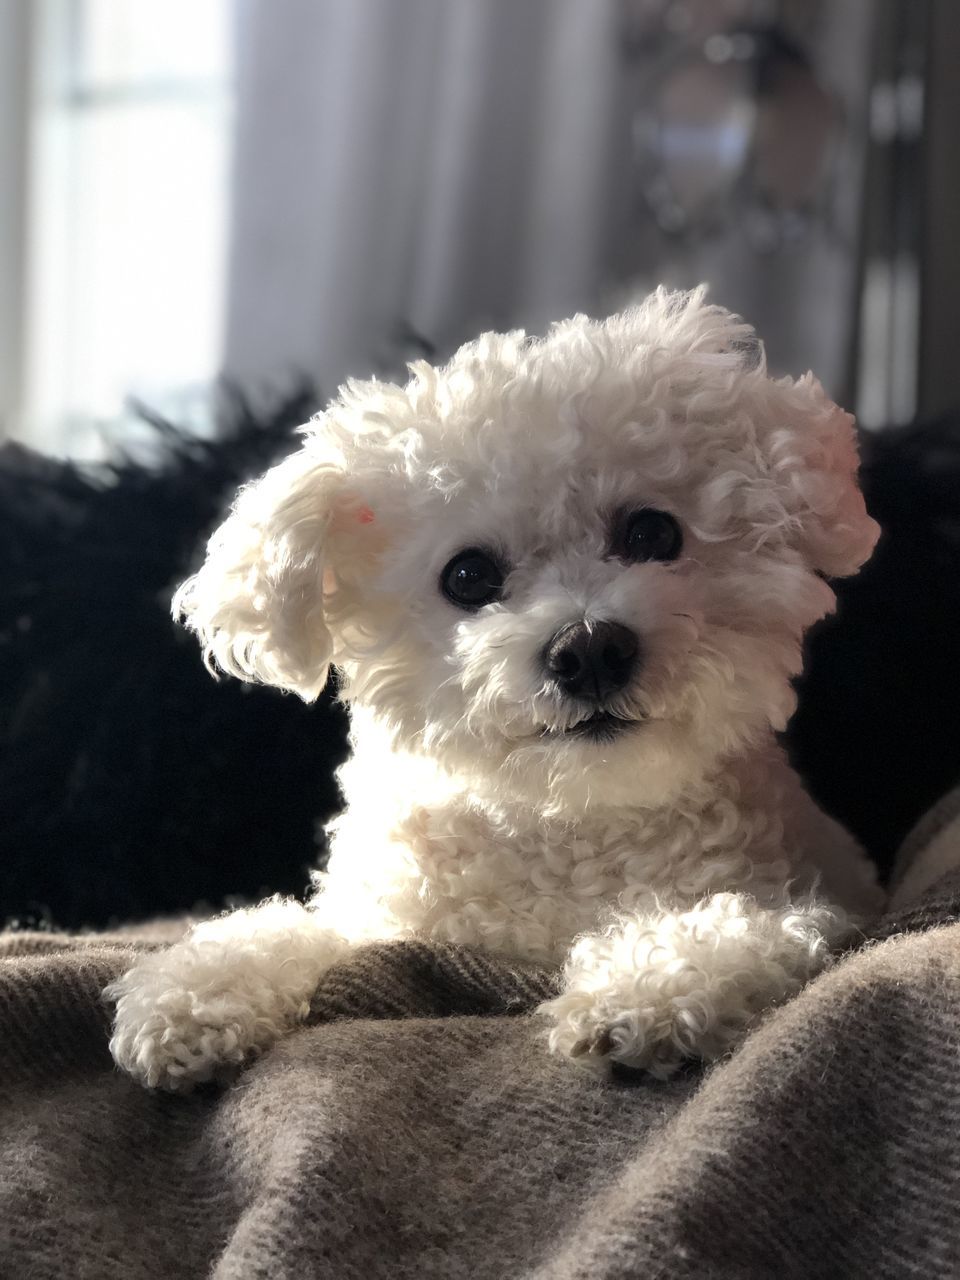 pet, domestic animals, dog, canine, mammal, one animal, animal themes, animal, cute, indoors, bichon, poodle, lap dog, portrait, puppy, looking at camera, no people, bolognese, relaxation, home interior, sitting, white, young animal, focus on foreground, sofa